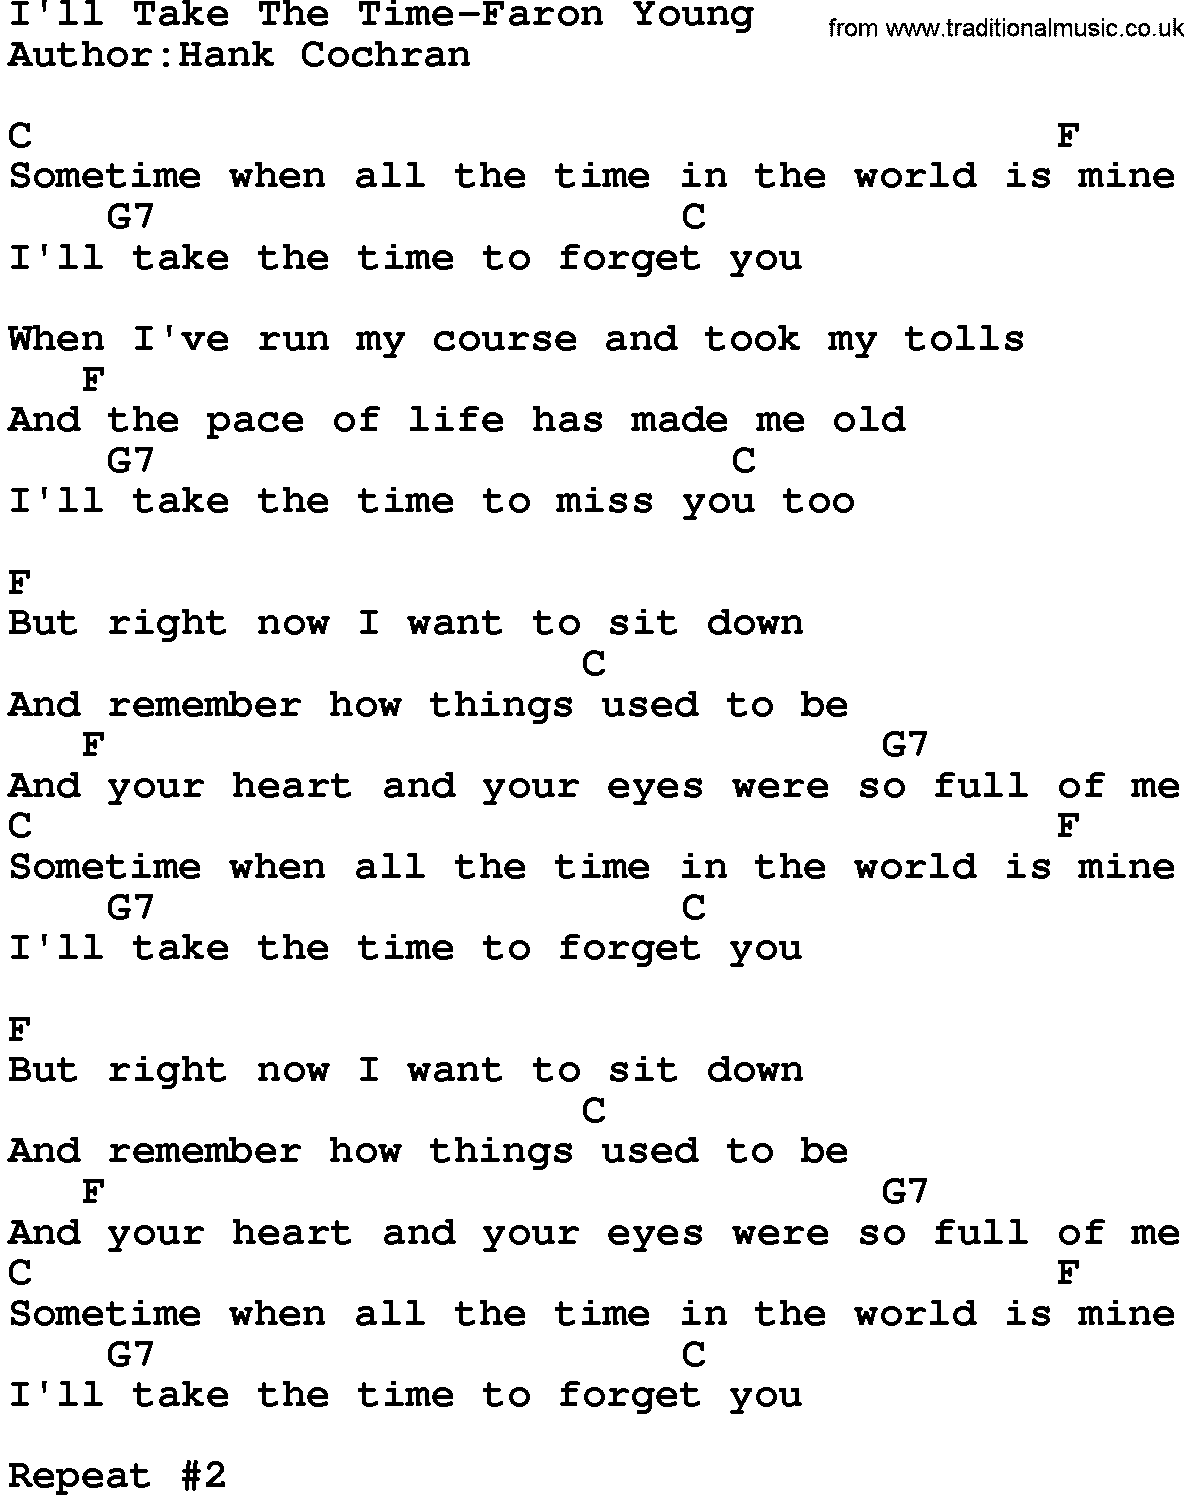 Country music song: I'll Take The Time-Faron Young lyrics and chords